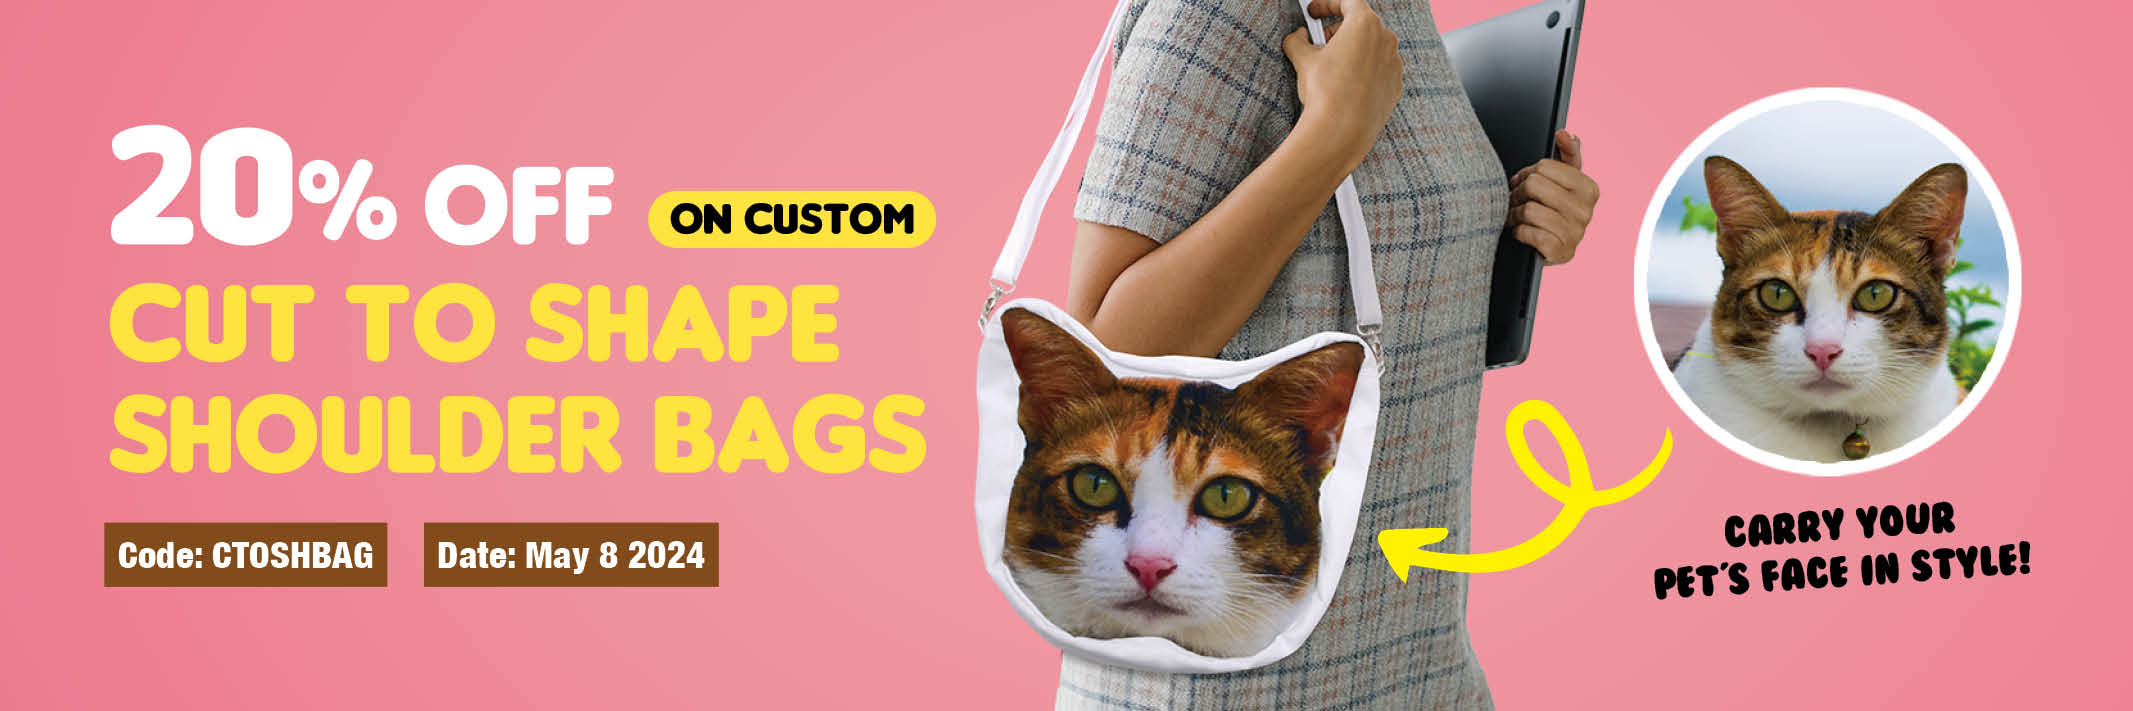 20% Off on Custom Cut to Shape Shoulder Bags Carry Your Pet's Face in Style!